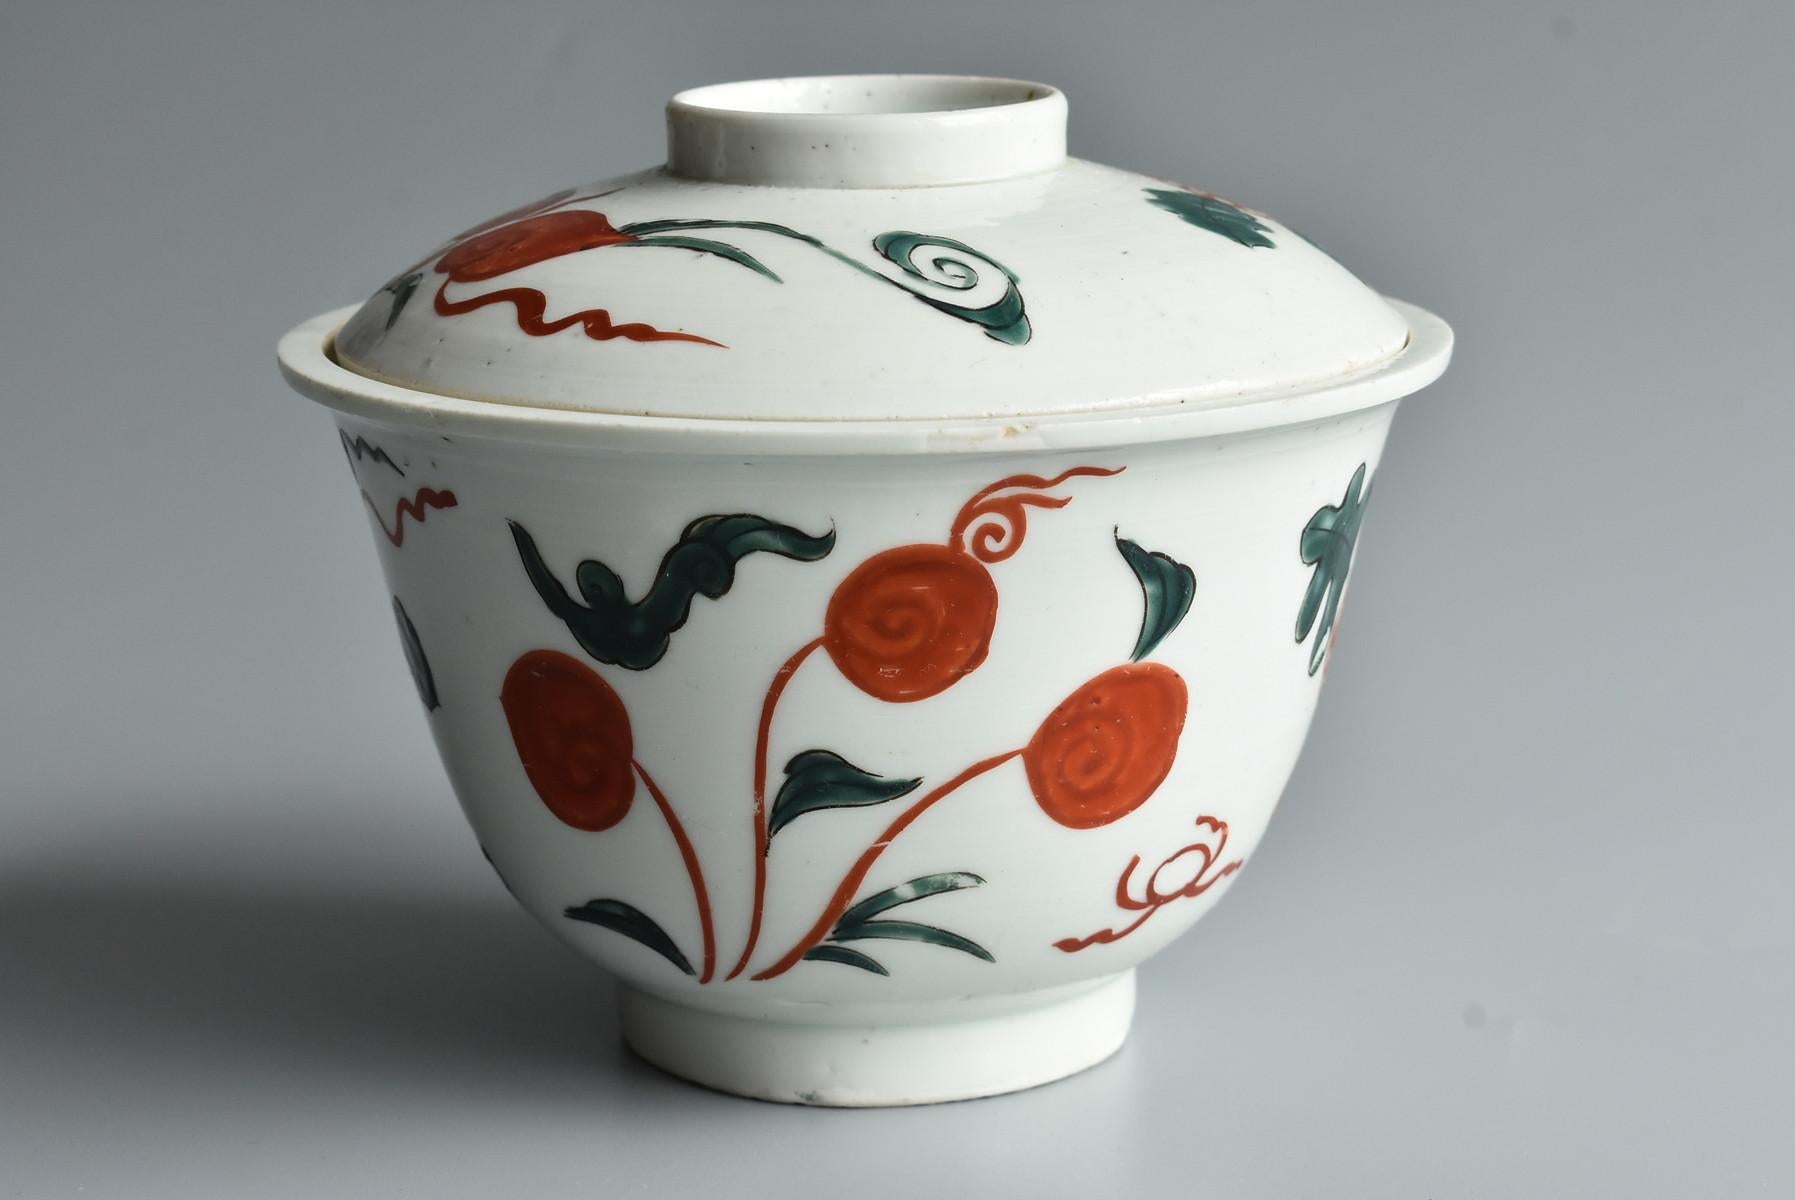 A bowl from the Qing dynasty of China (around the 19th century).
It is a simple red and green painting.
I feel very kind and cute.
Also, when you remove the lid, you can see the green and yellow round patterns.
It's very interesting.
There is a